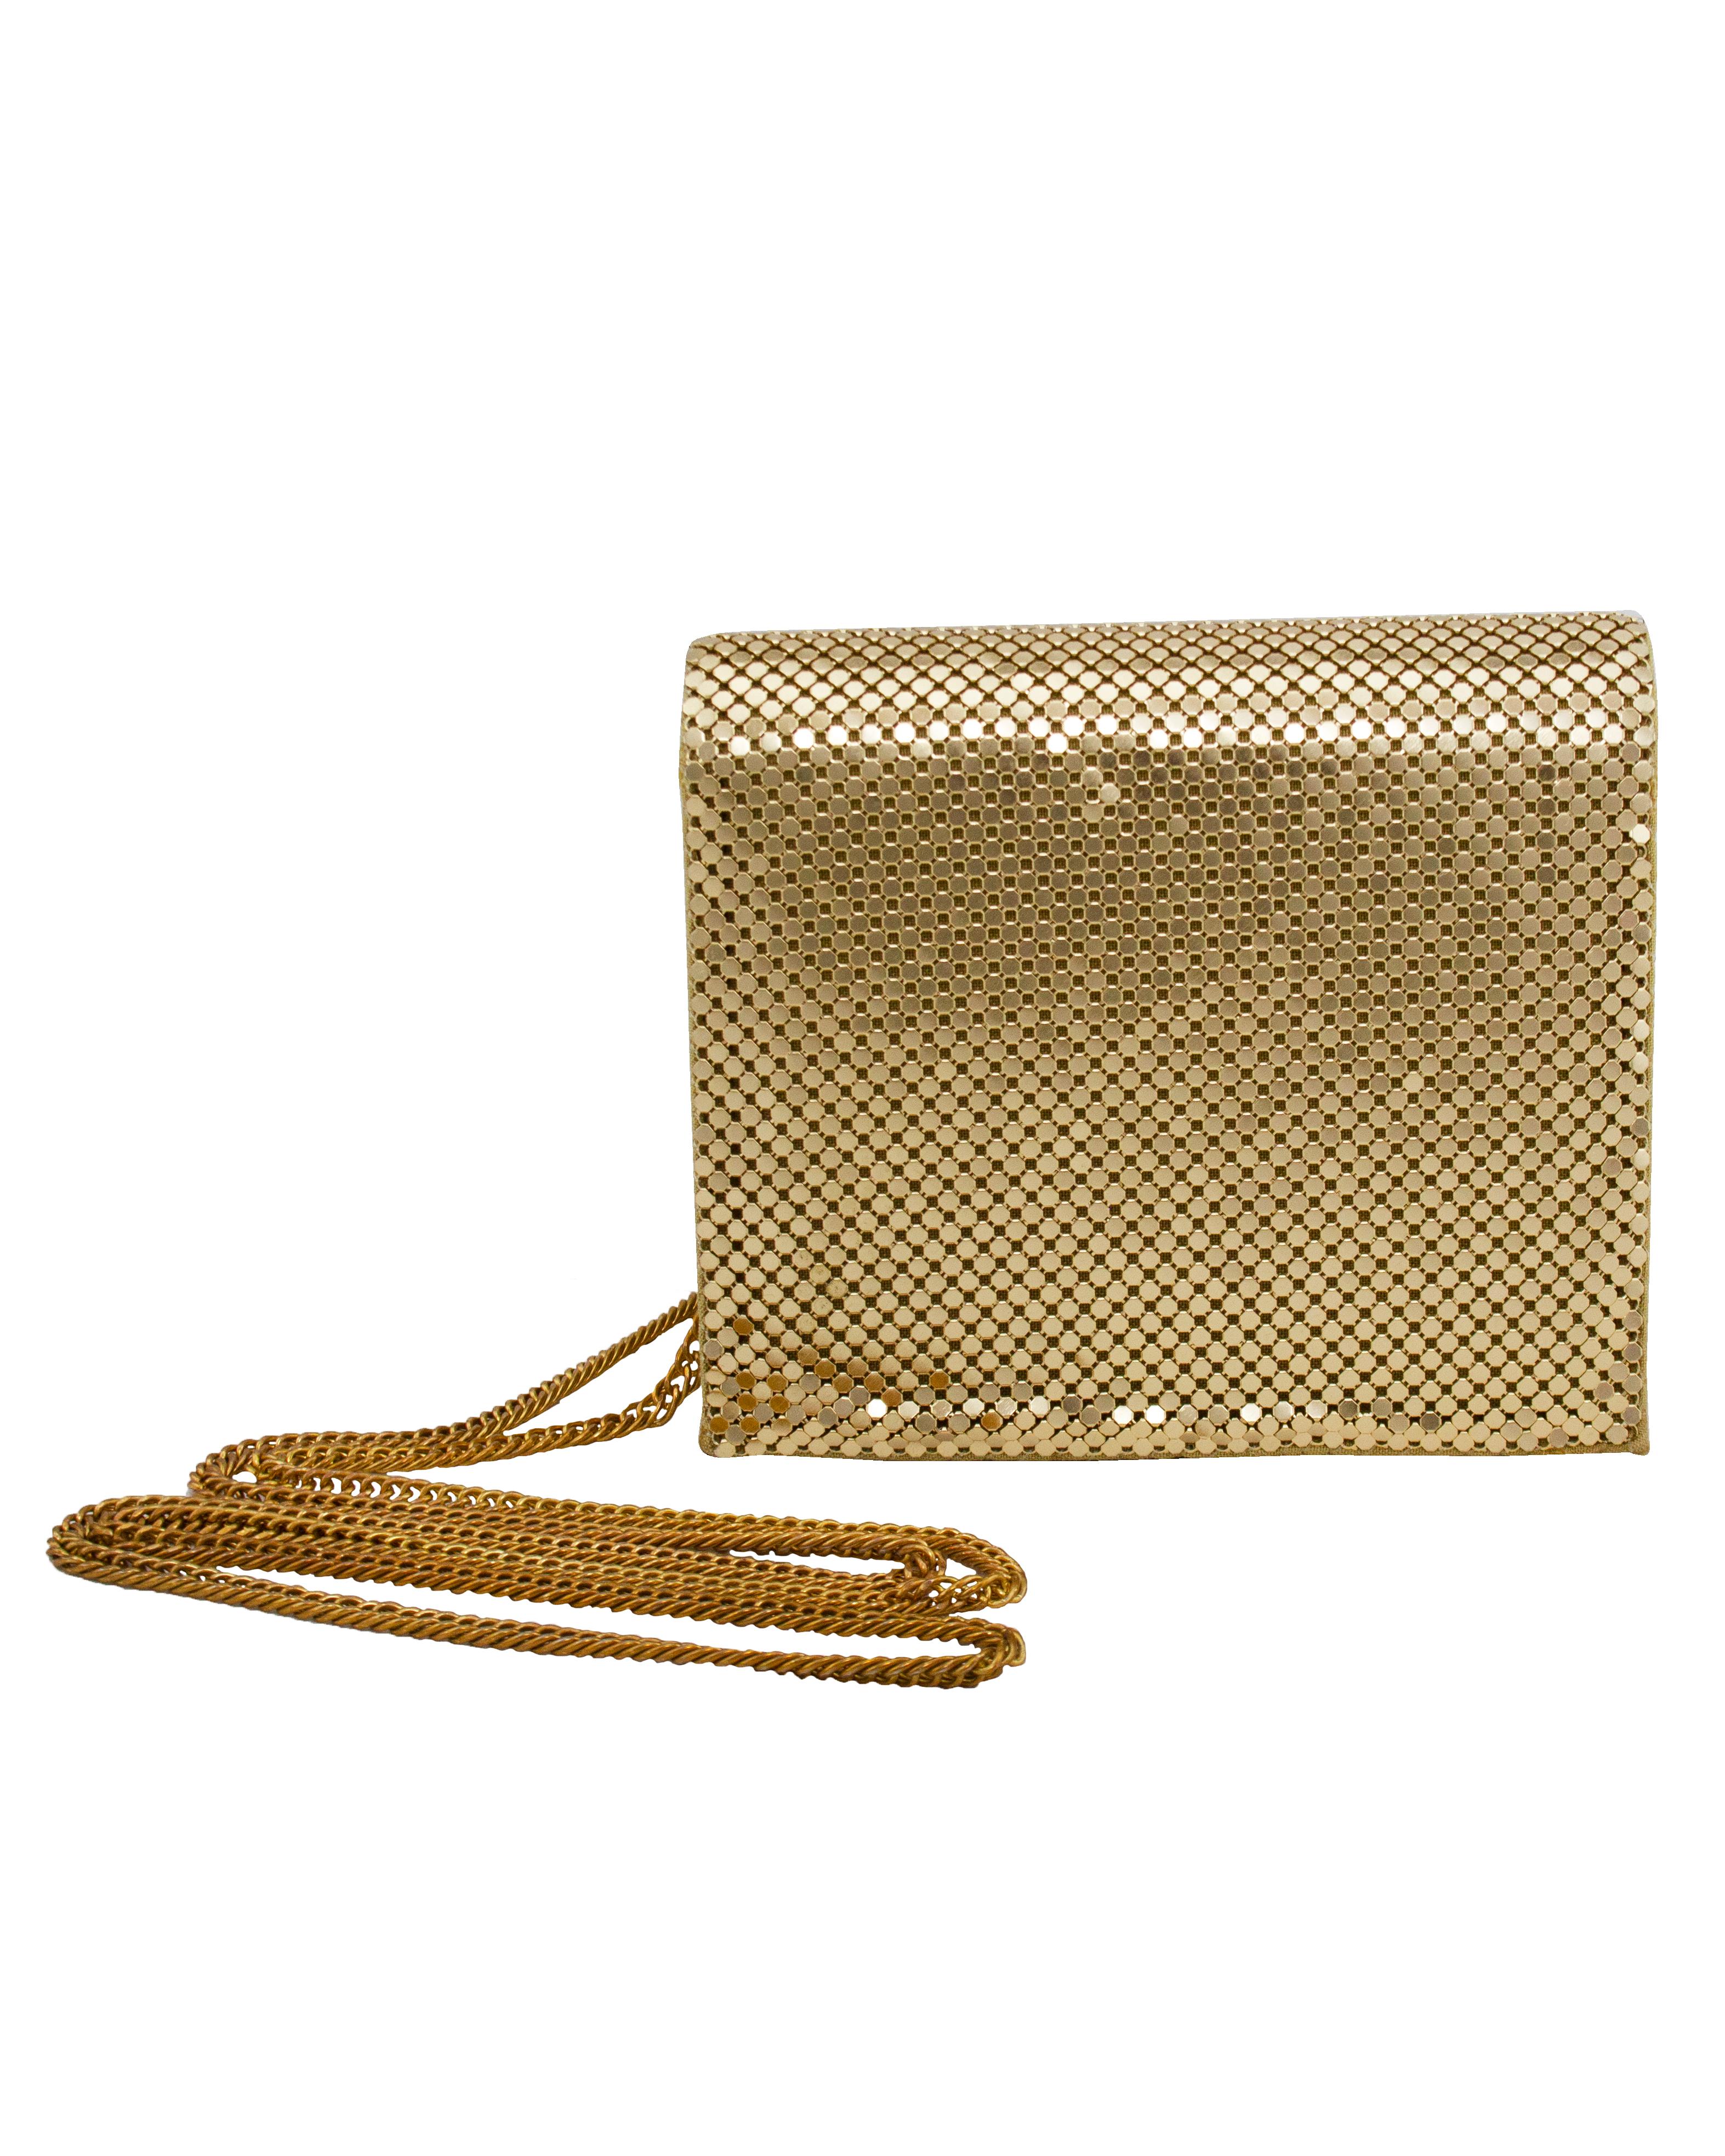 Fabulous Whiting and Davis mini bag from the 1980s. The iconic Whiting and Davis gold metal mesh with gold leather. Envelope style with a magnetic snap button closure. The long gold tone chain can be worn on the shoulder or crossbody. The chain can